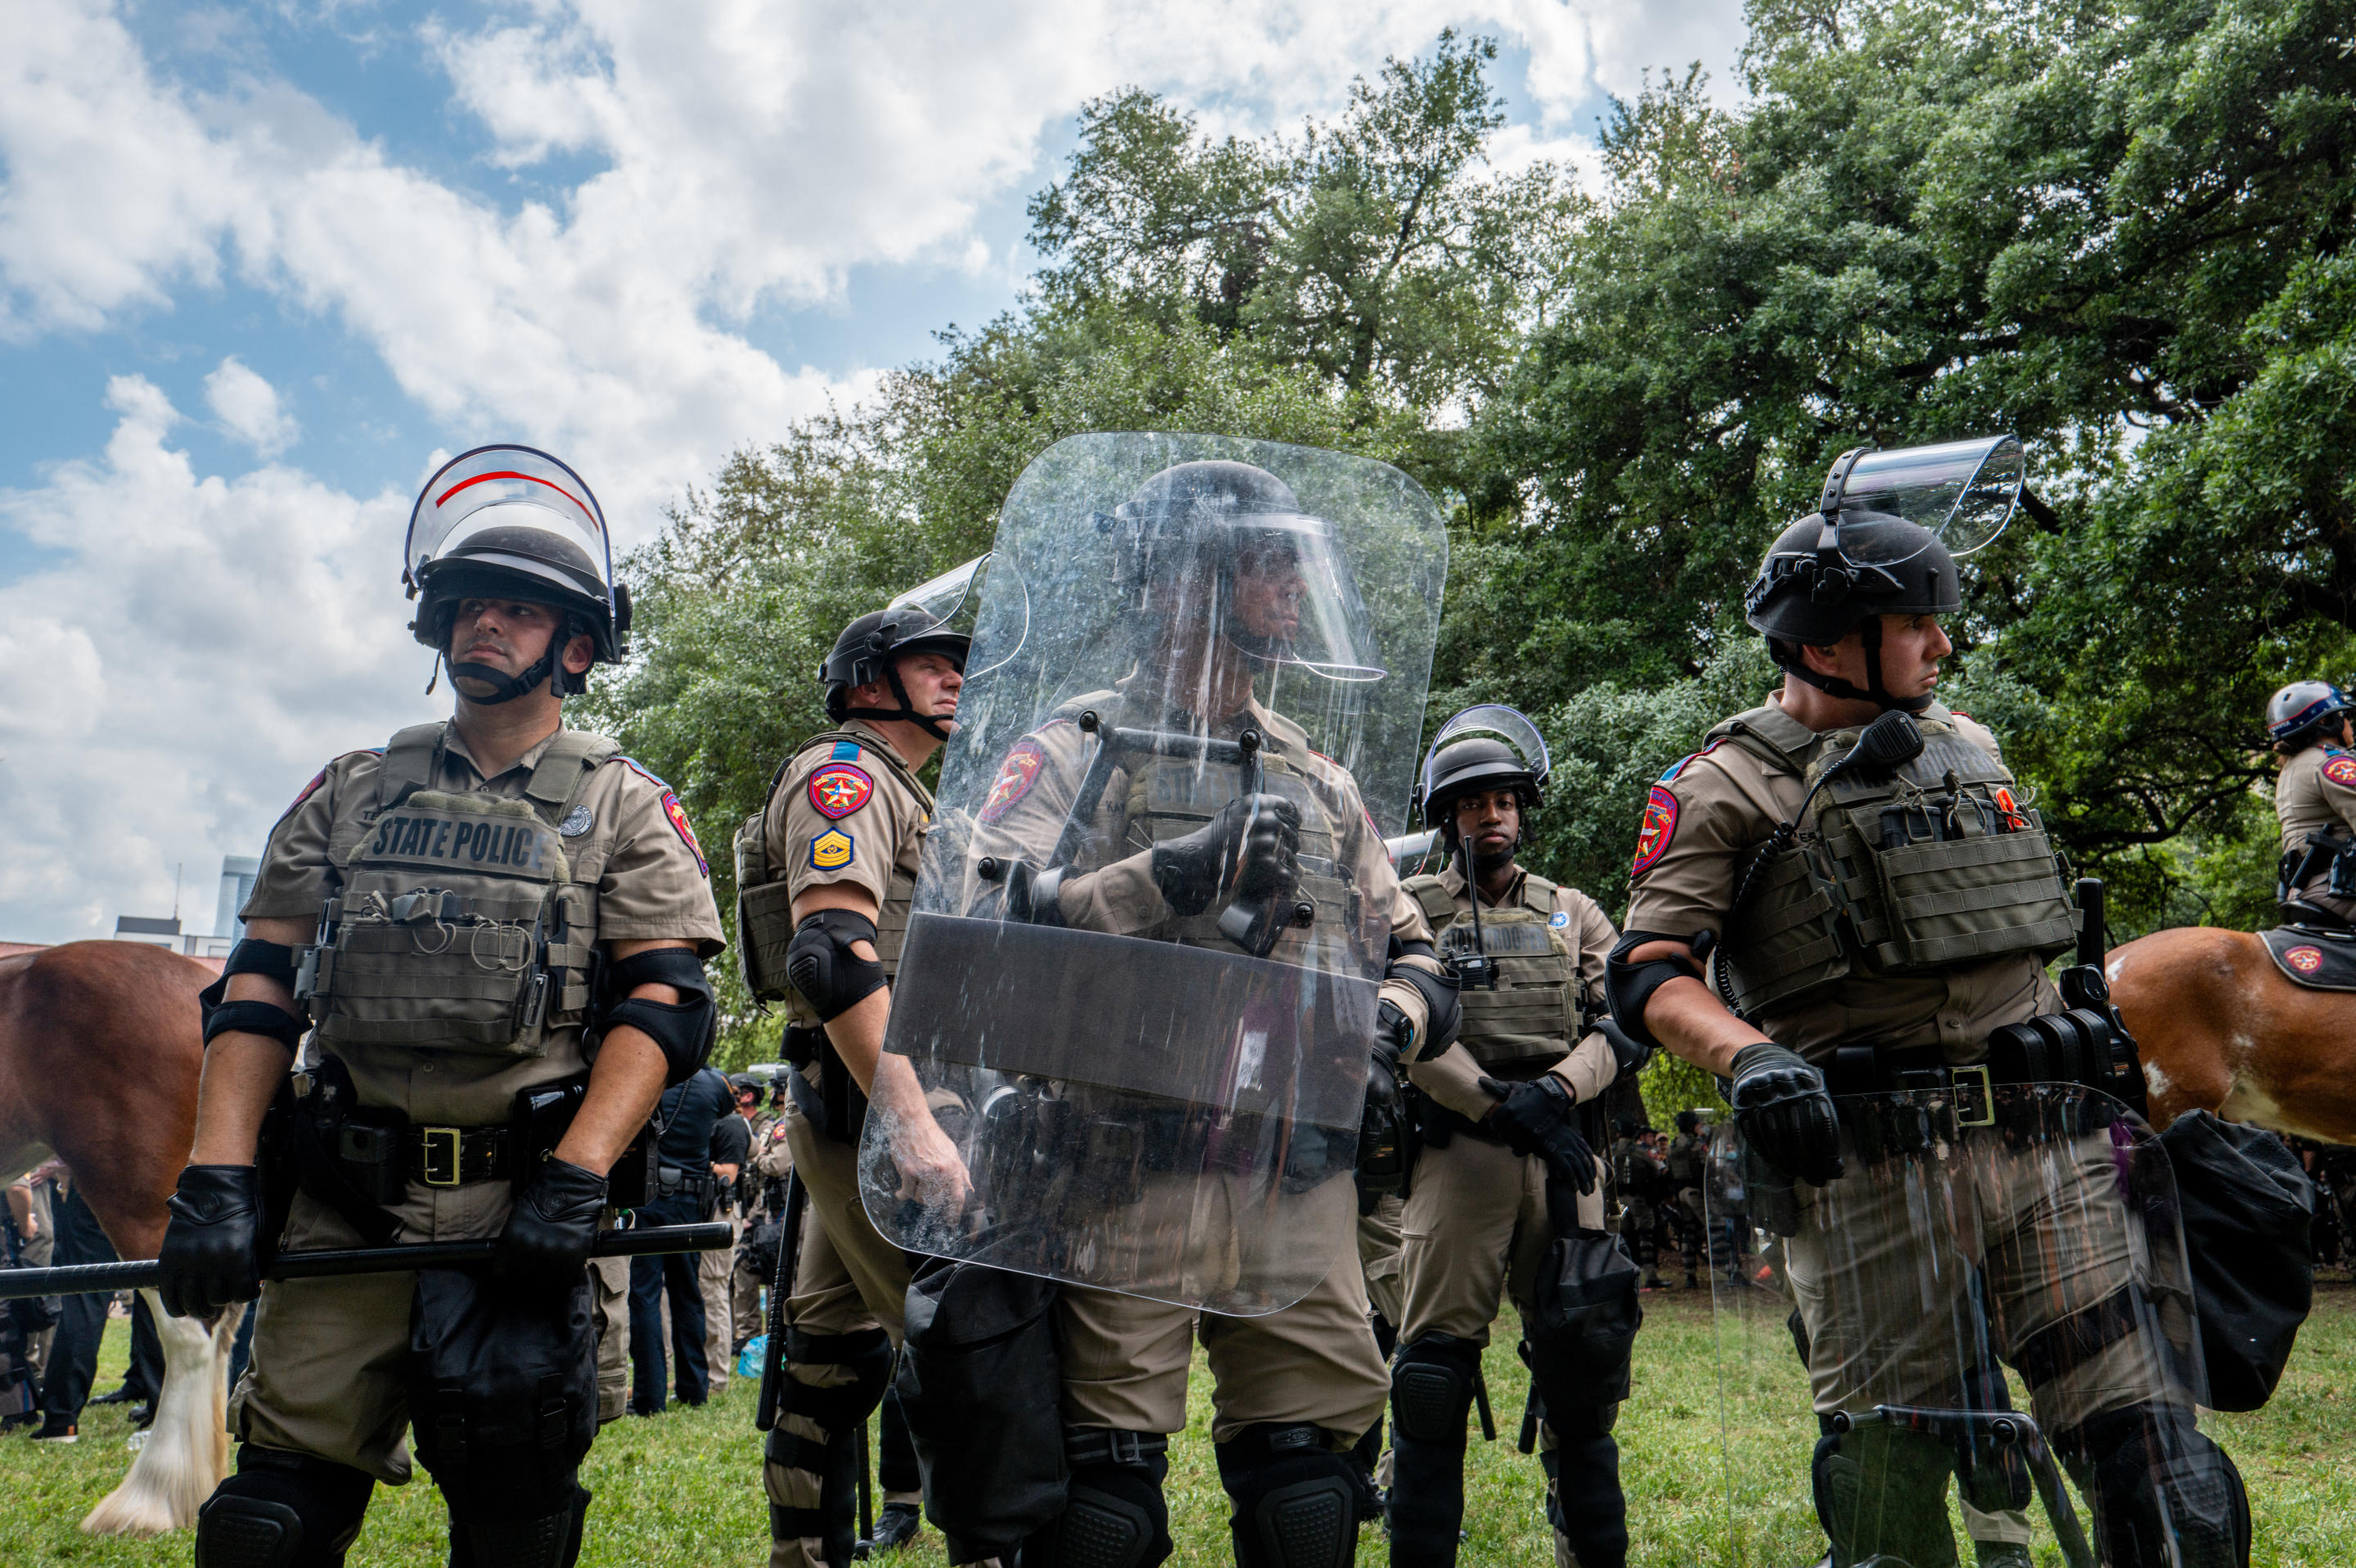 Police personnel stand by during a demonstration at the The University of Texas at Austin.